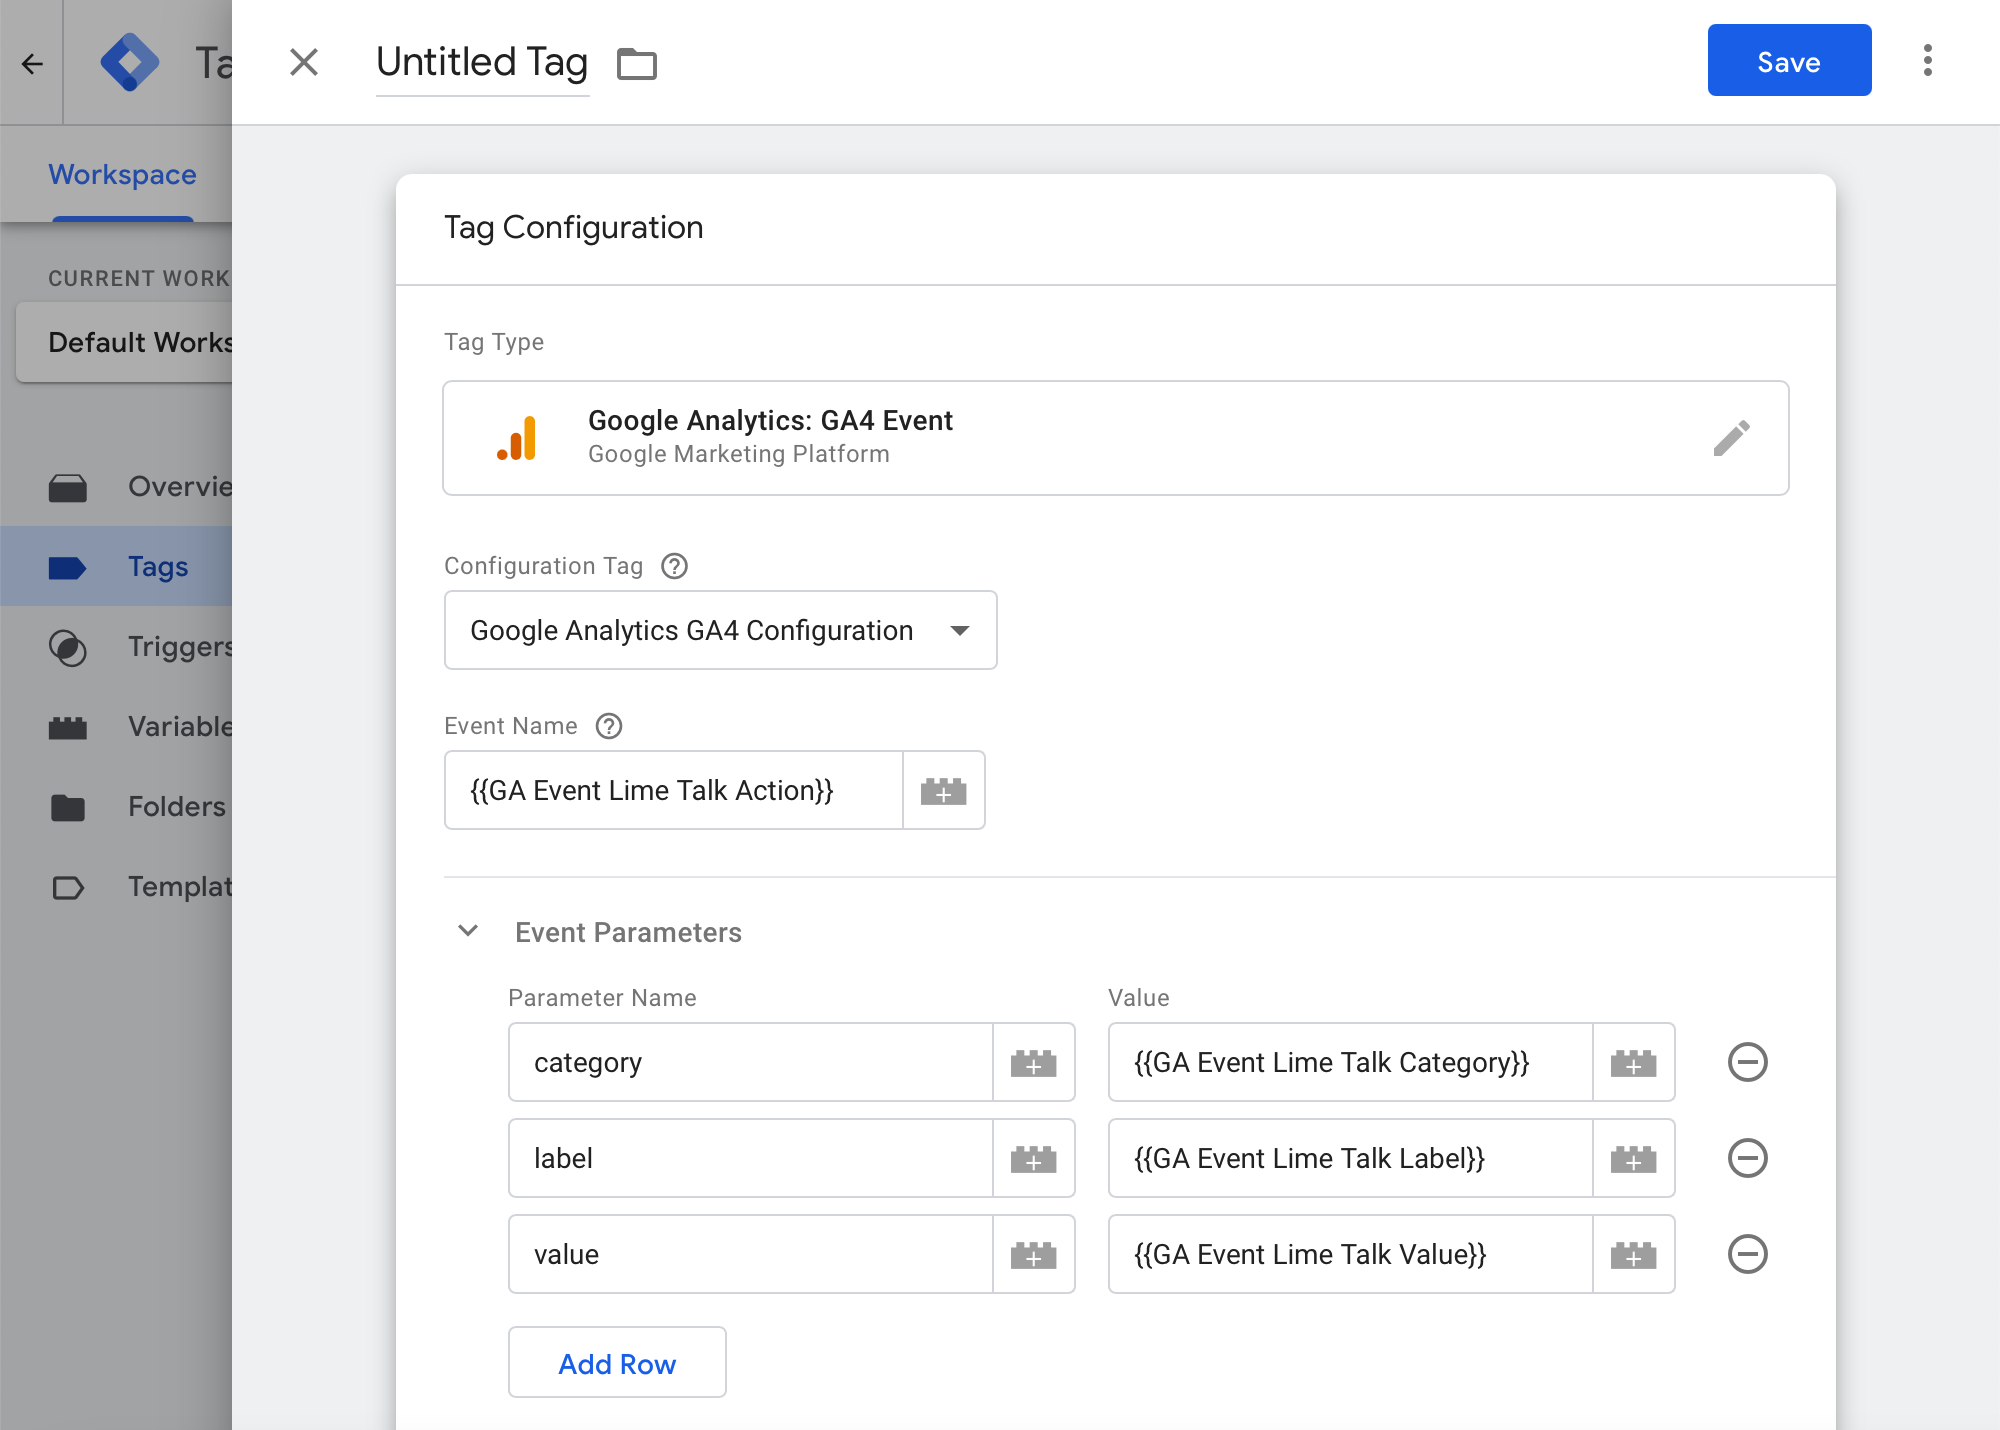 Tracking events on Google Analytics 4 via Google Tag Manager